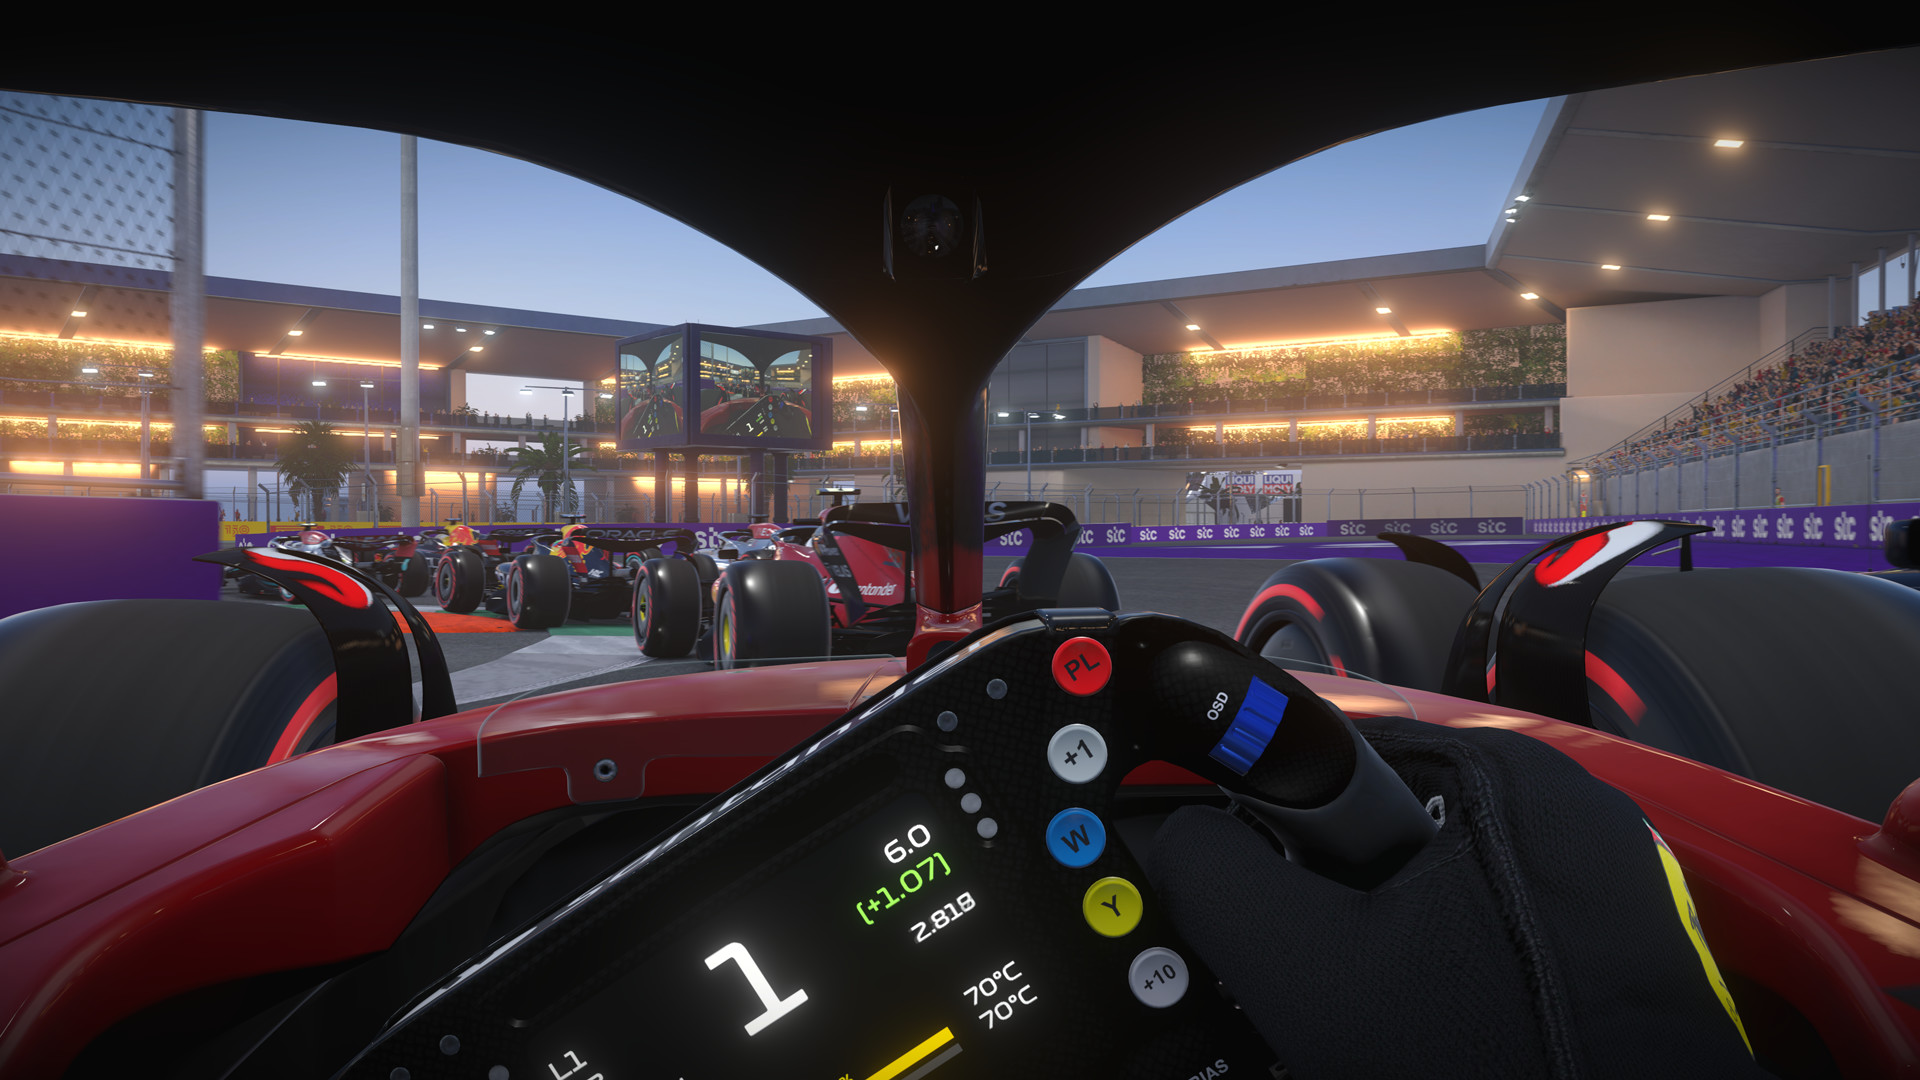 F1 2022 performance guide: Best settings for high frame rate